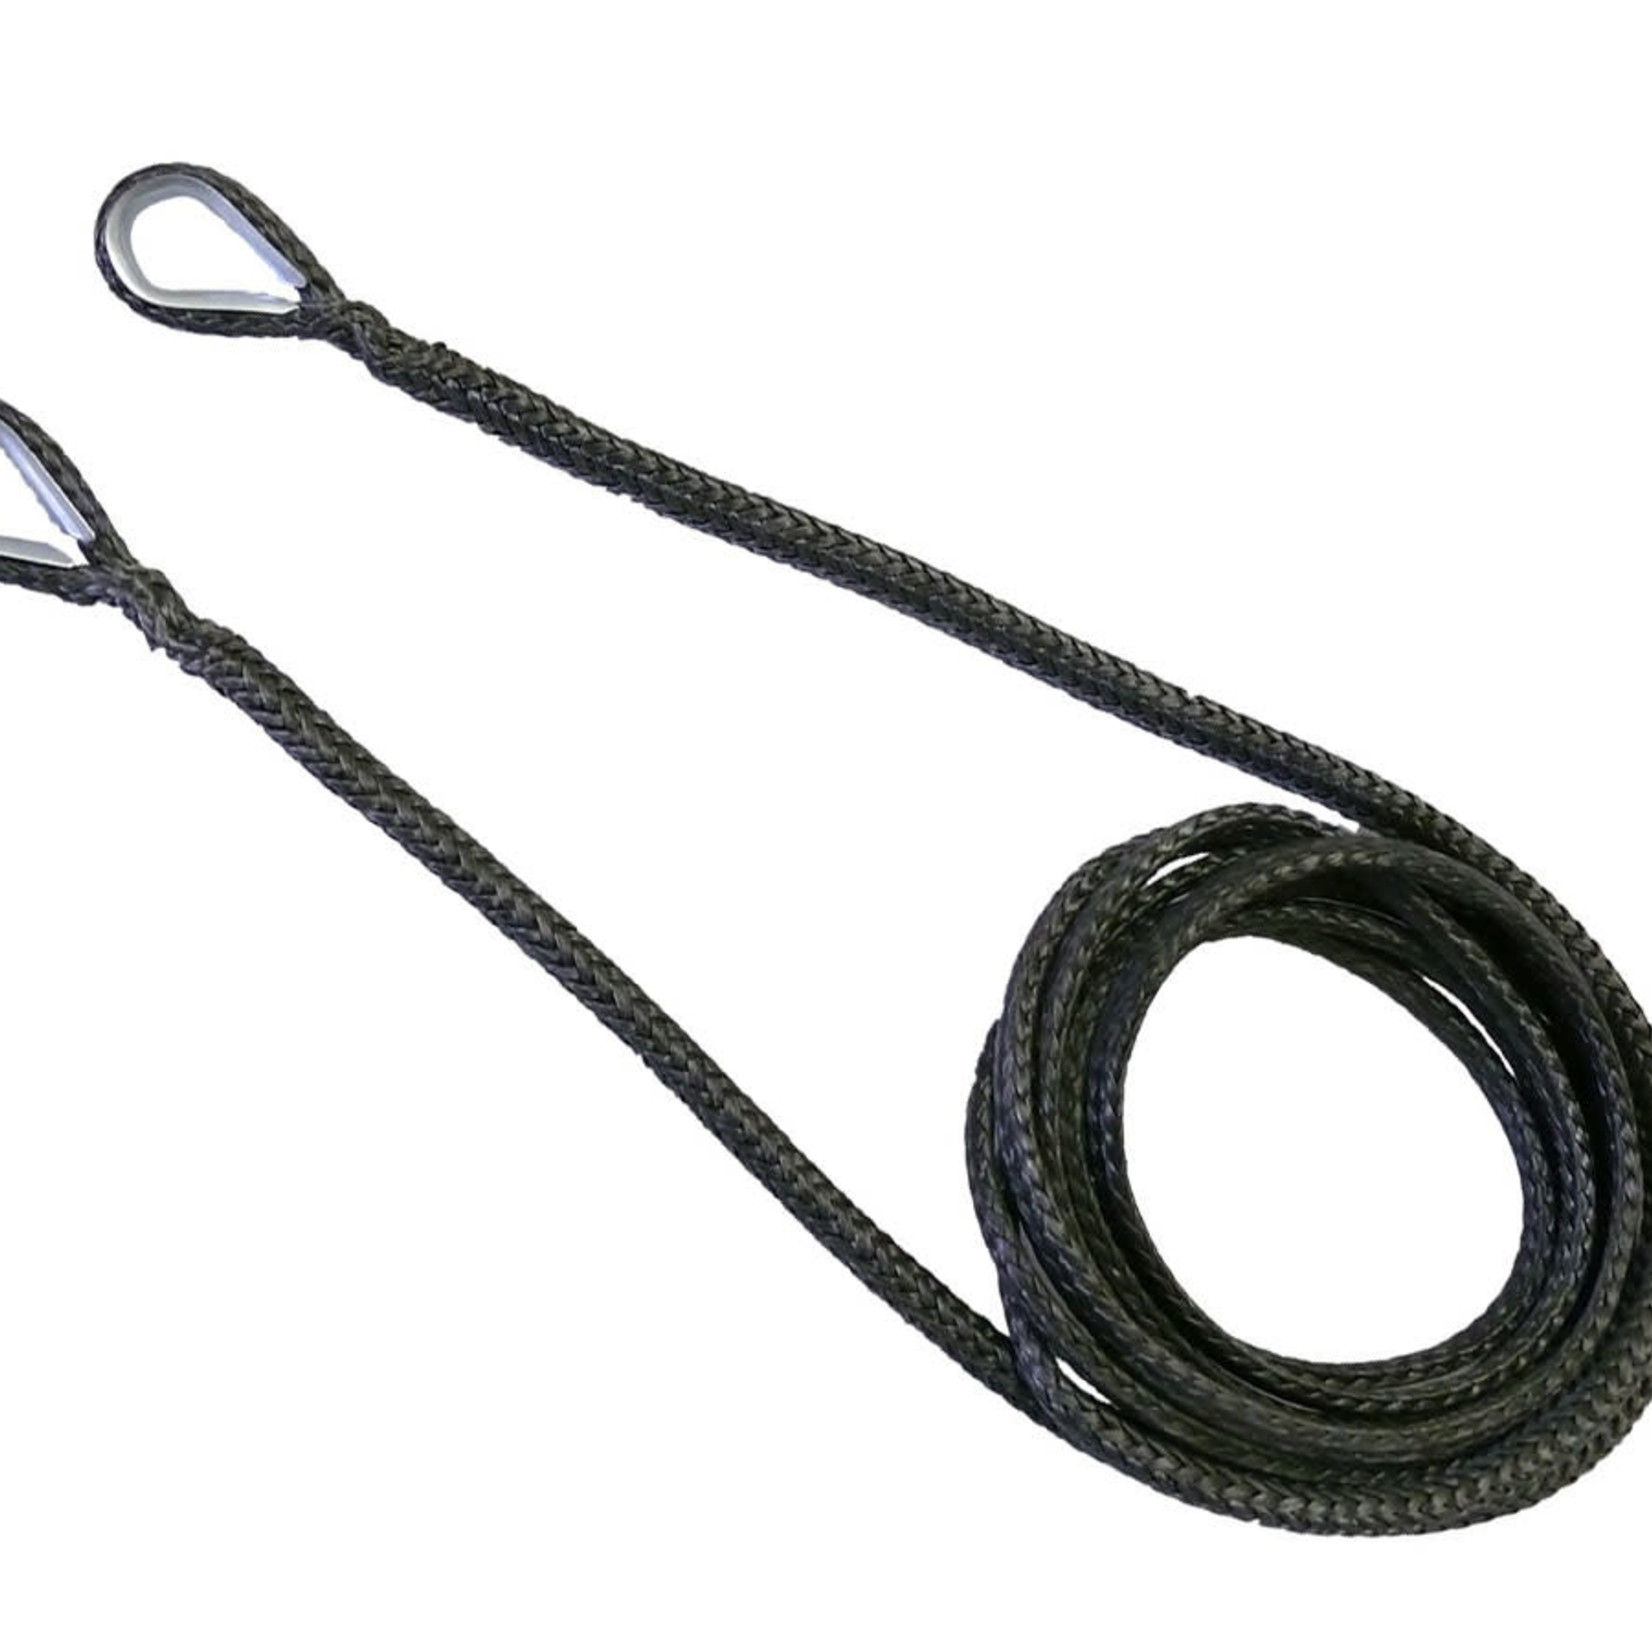 65' Double Back Sling